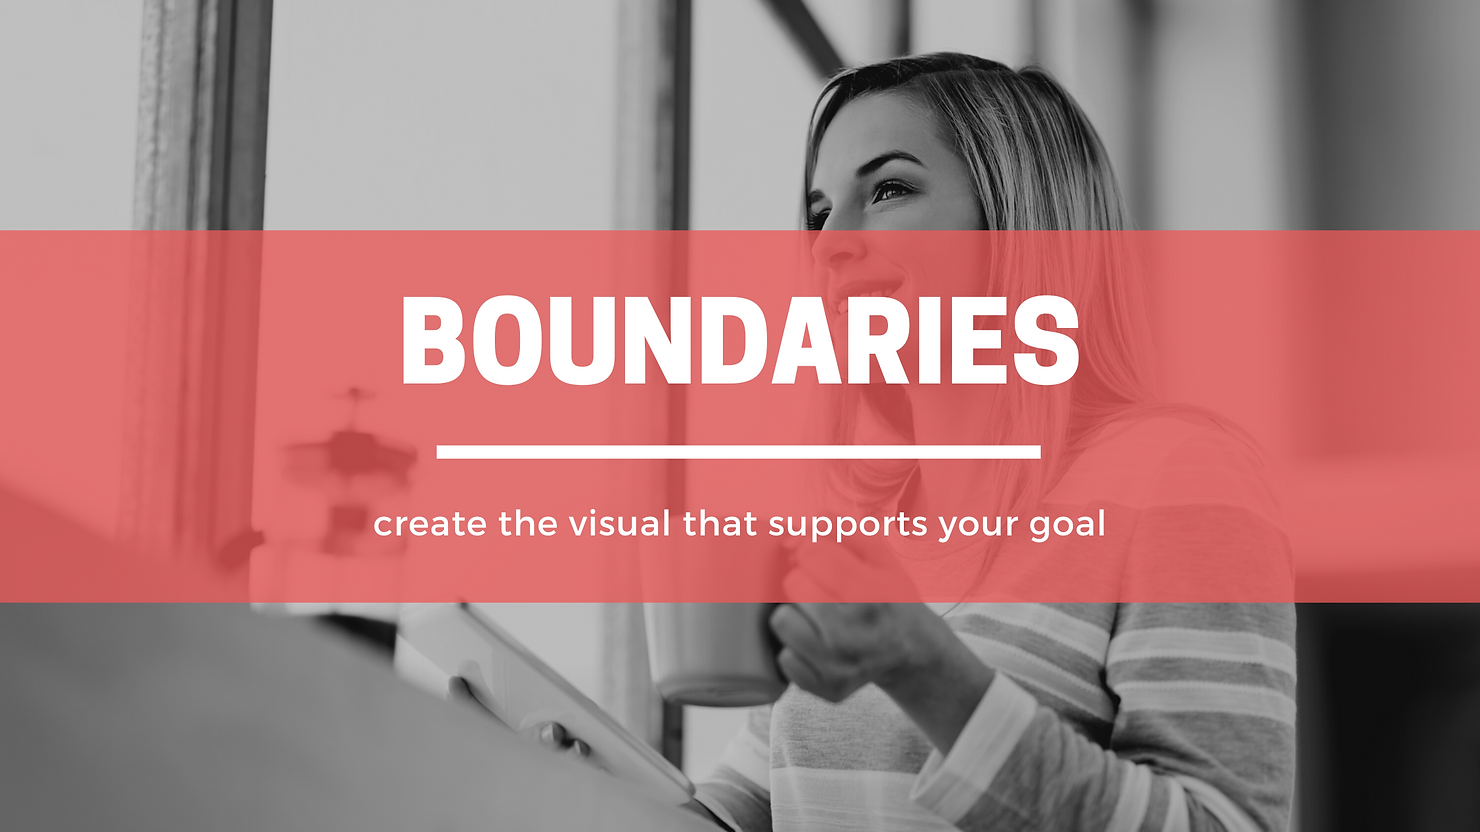 Create the visual that supports your goal